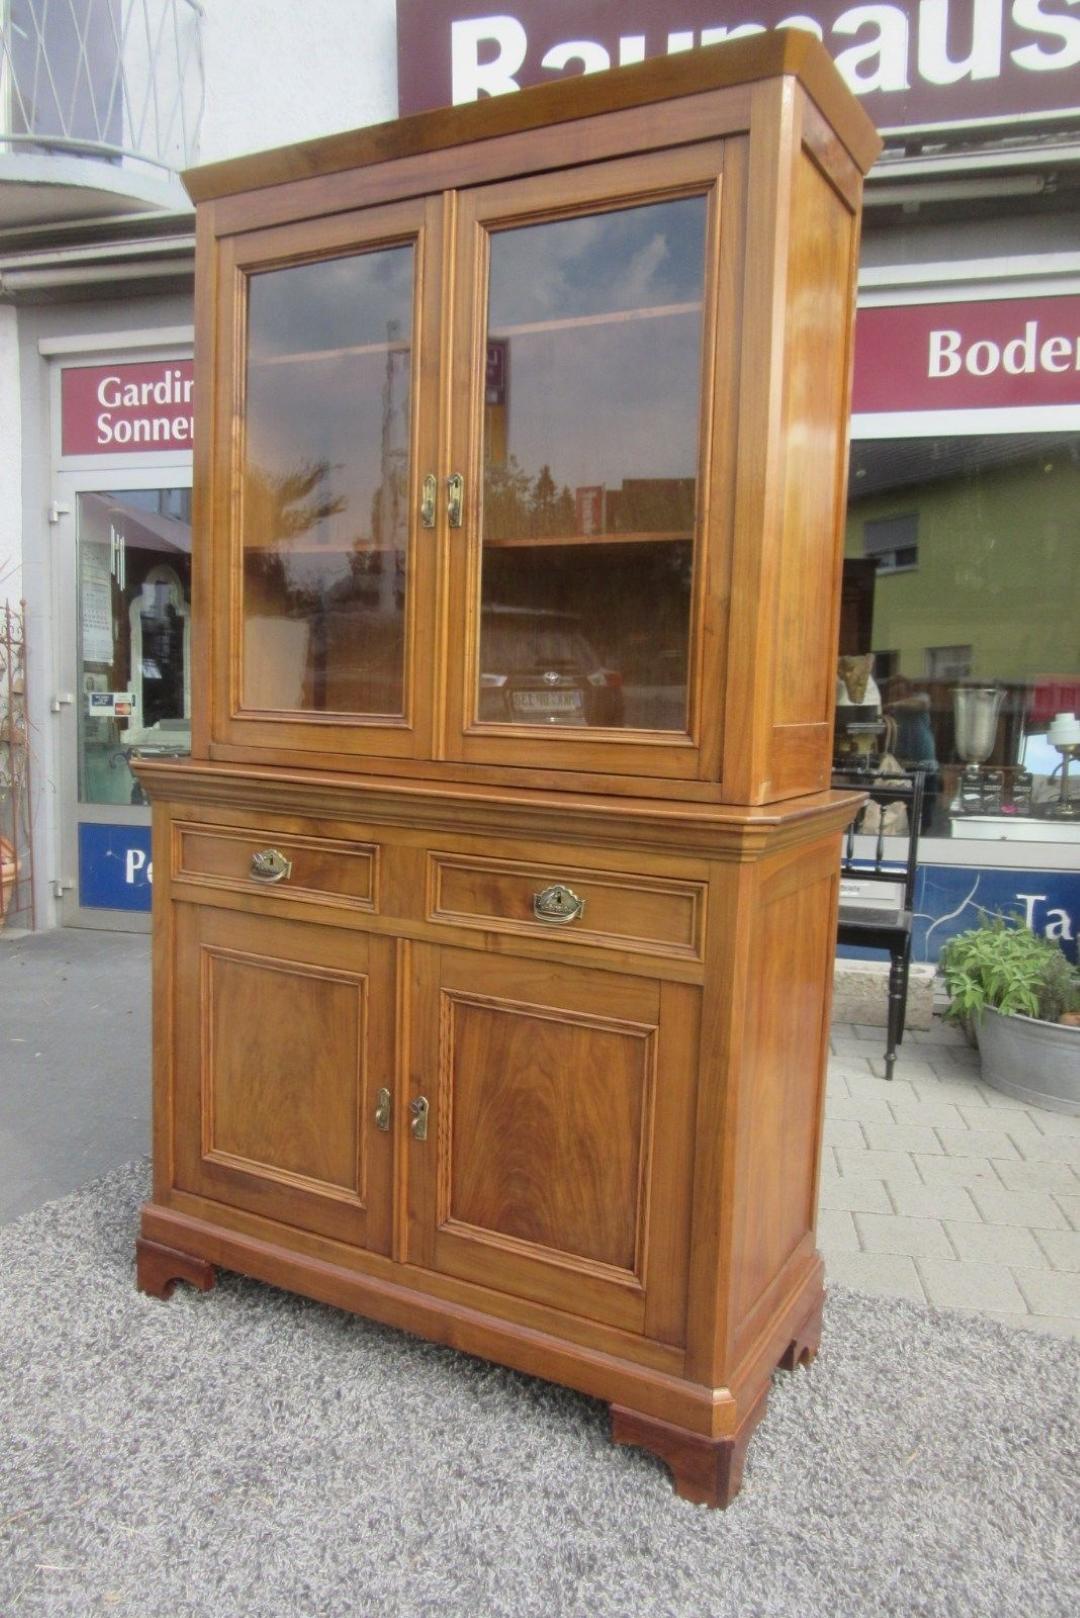 Elegant late Biedermeier kitchen cabinet or vitrine cabinet made of dark veneered cherrywood. Features two doors, two drawers and a vitrine compartment with two shelves. Comes with original keys and locks. The body is made of massive cherrywood. In